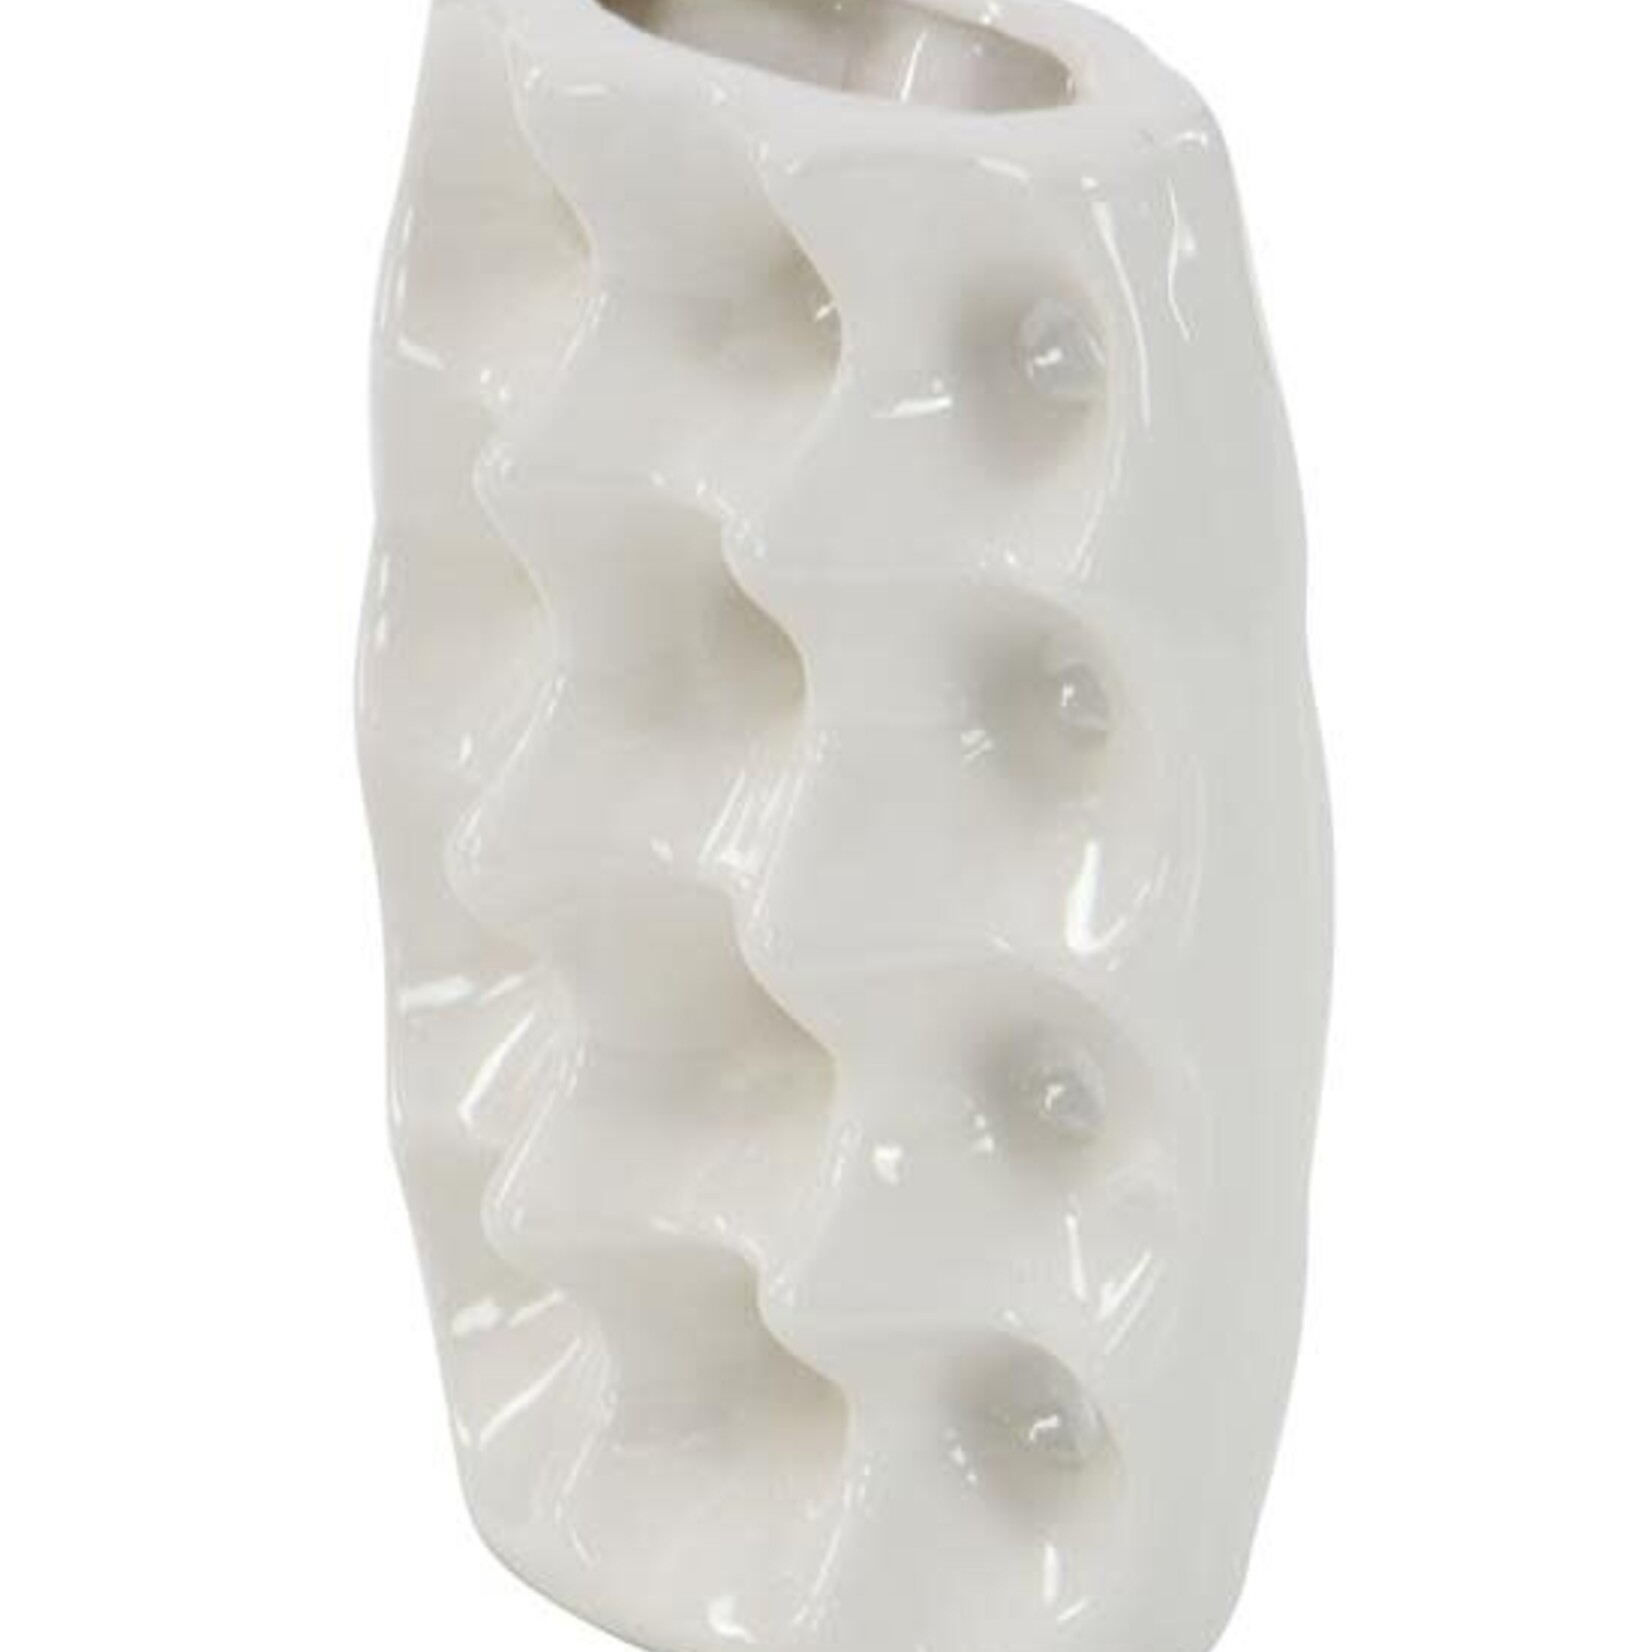 50% OFF WAS $23 NOW $11.50, 8”H X 5” WHITE CERAMIC VASE ASSORTED STYLES IN A BOX